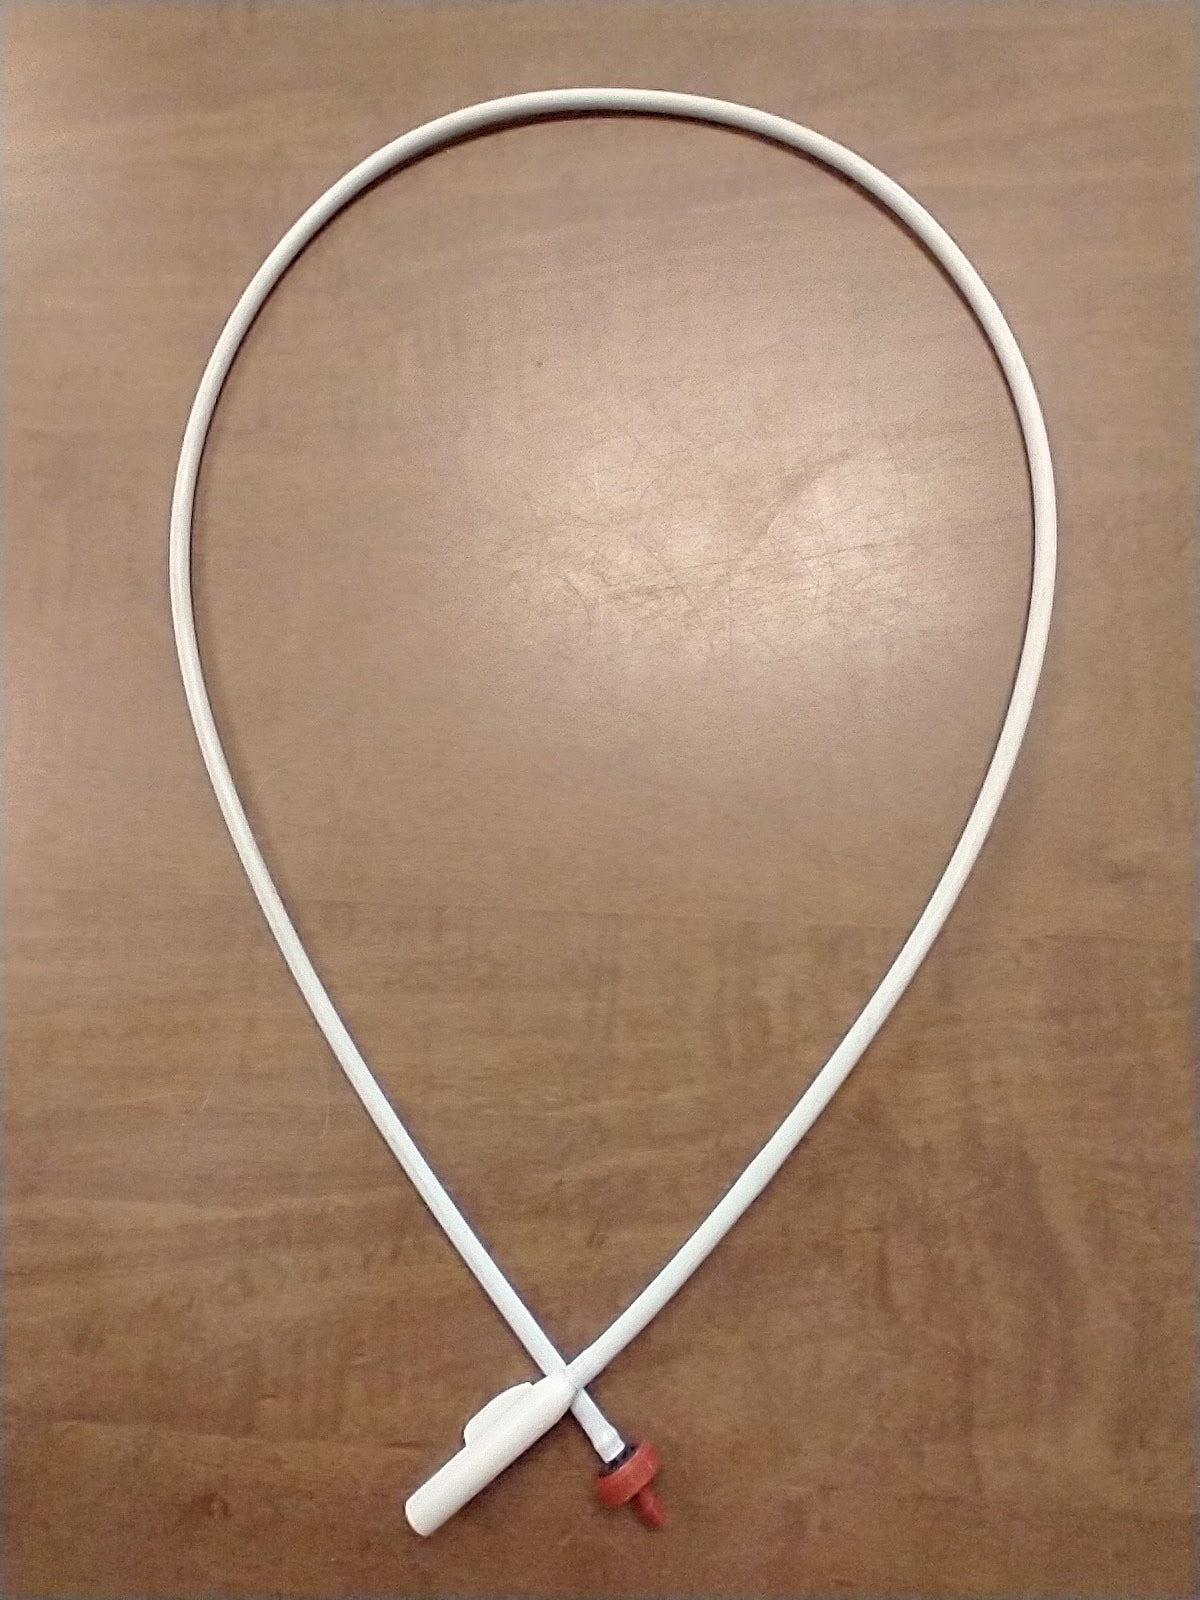 a white cord connected to a white cord